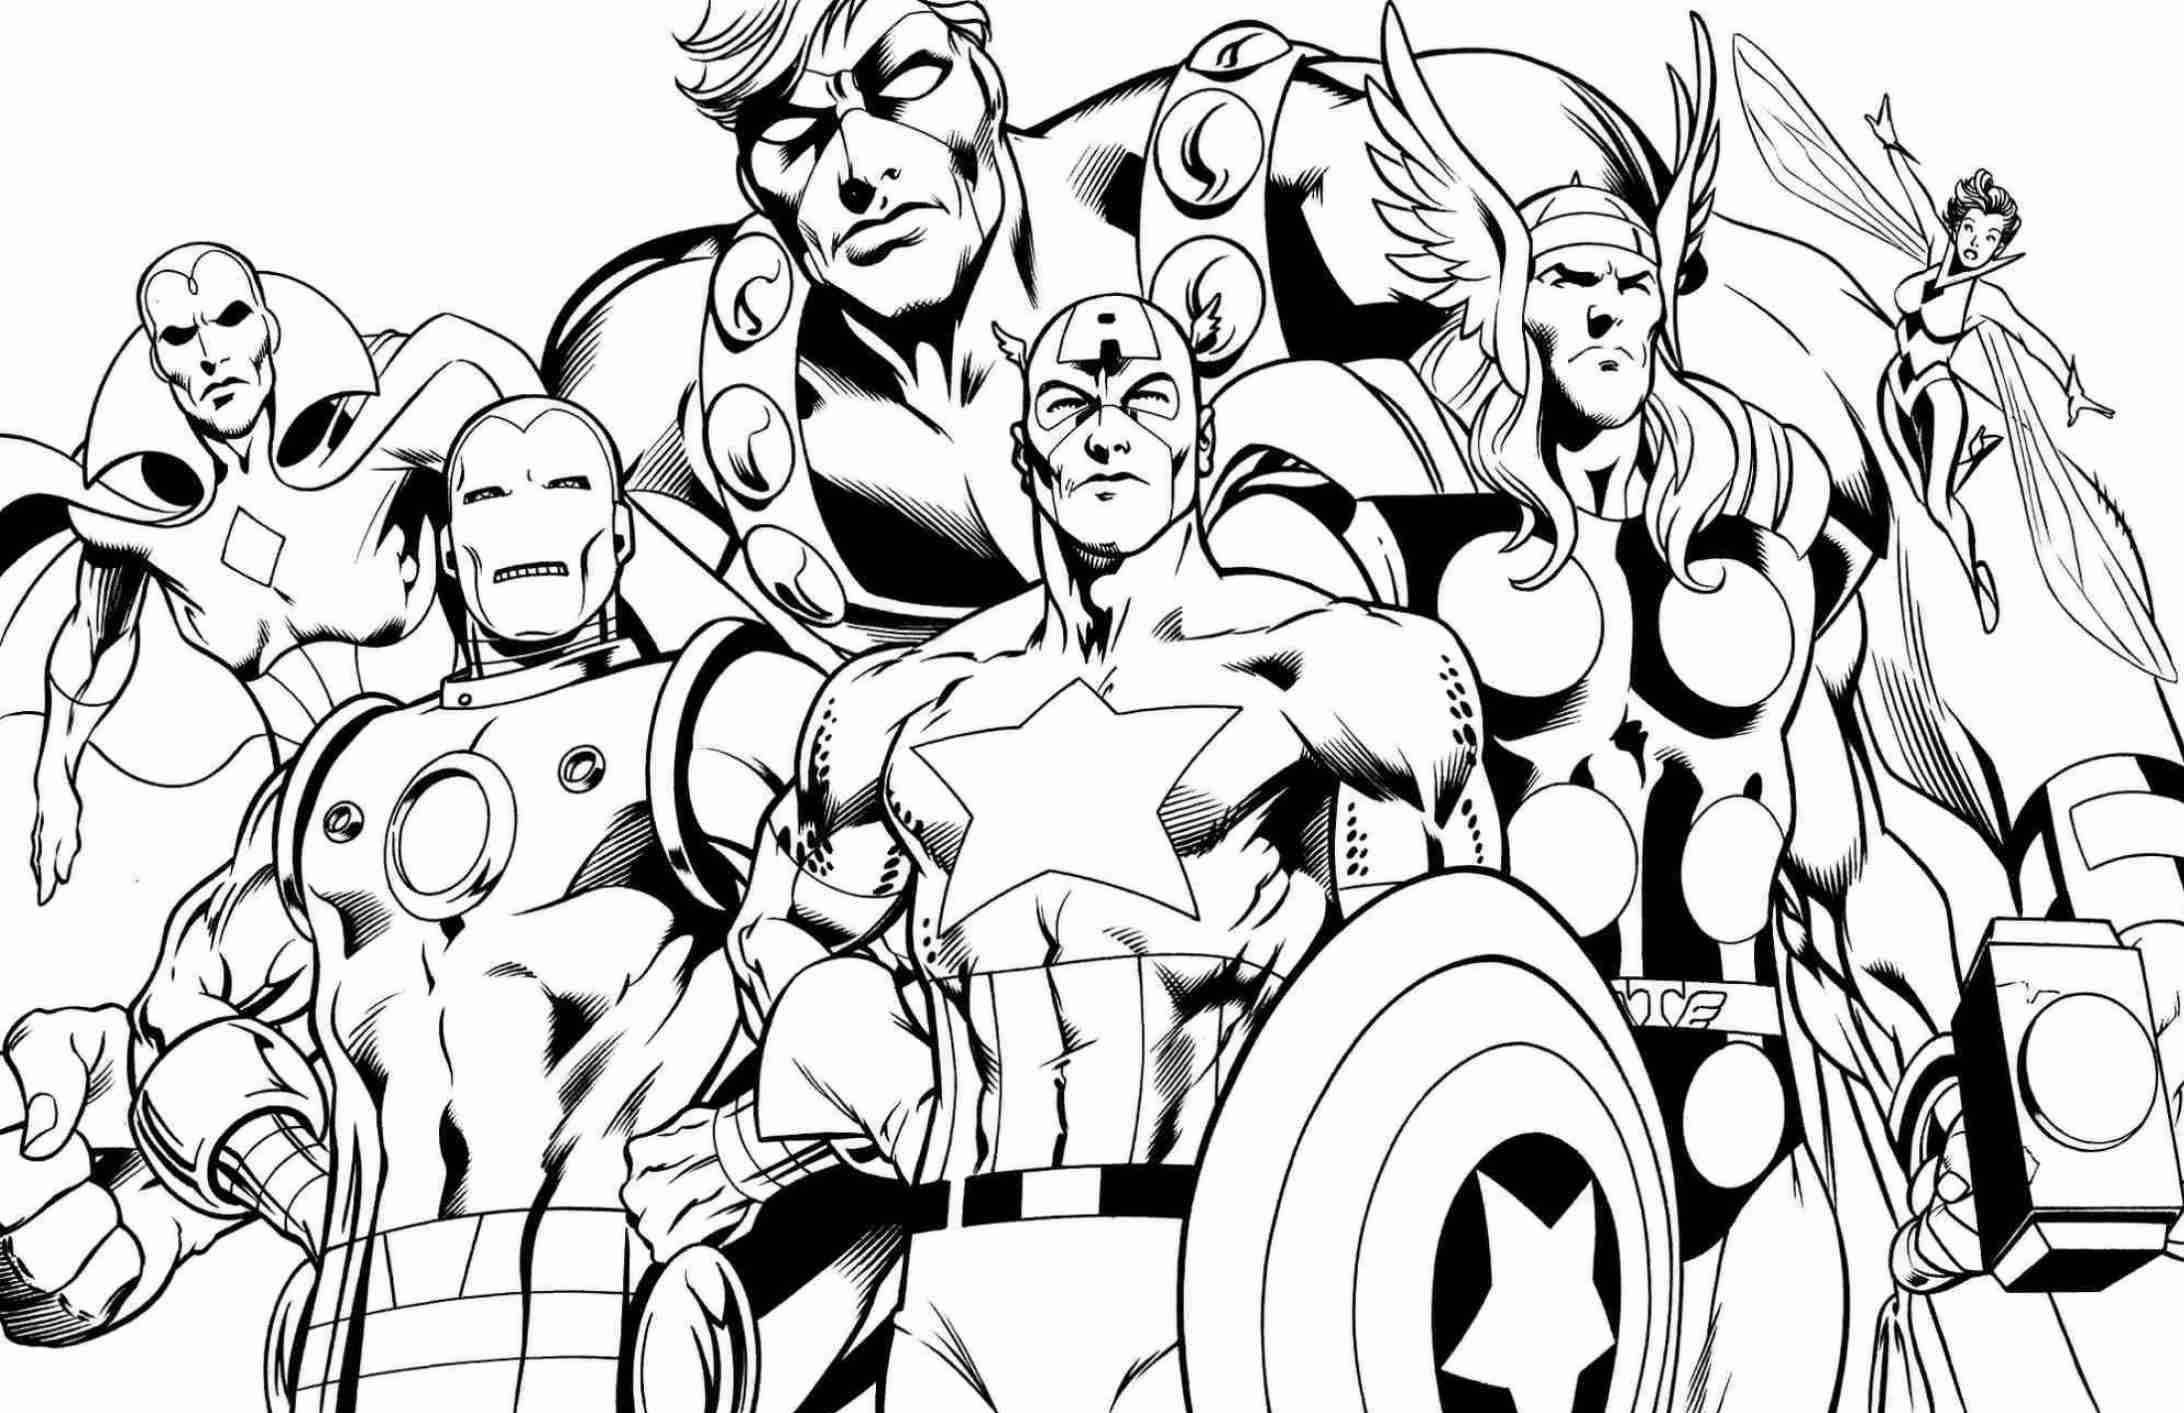 Super Hero Coloring Pages For Kids
 Superhero Coloring Pages Best Coloring Pages For Kids